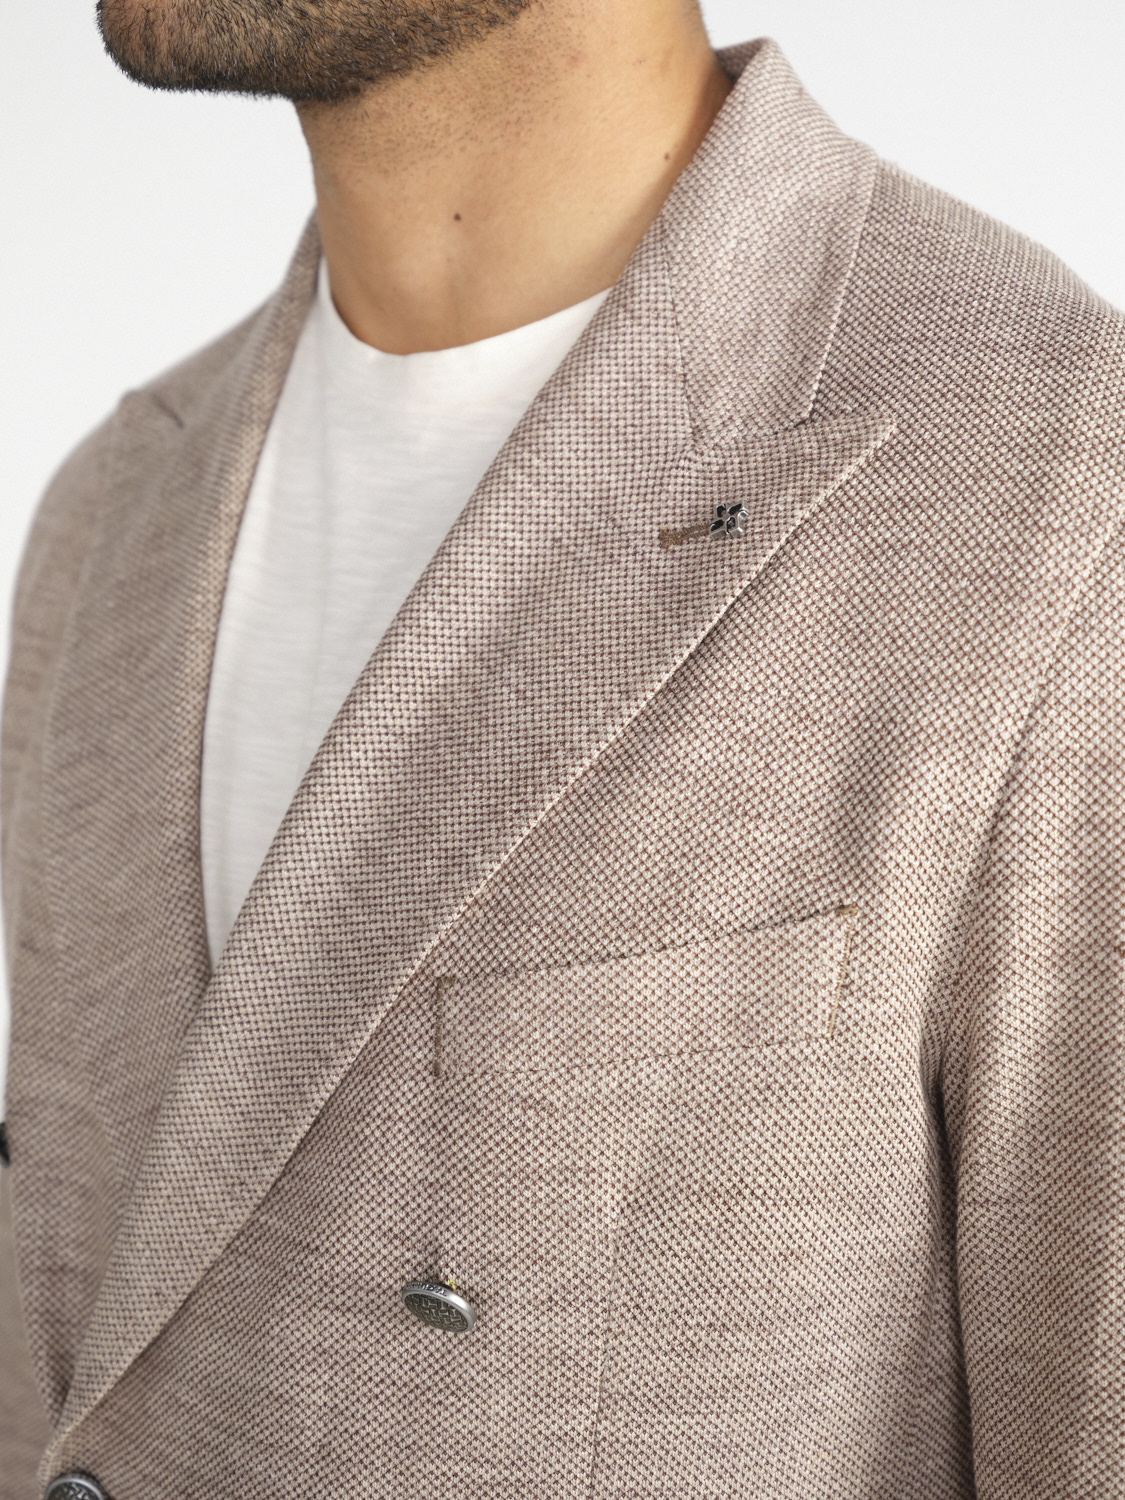 TAGLIATORE Jacket made from a linen-cotton mix  beige 50